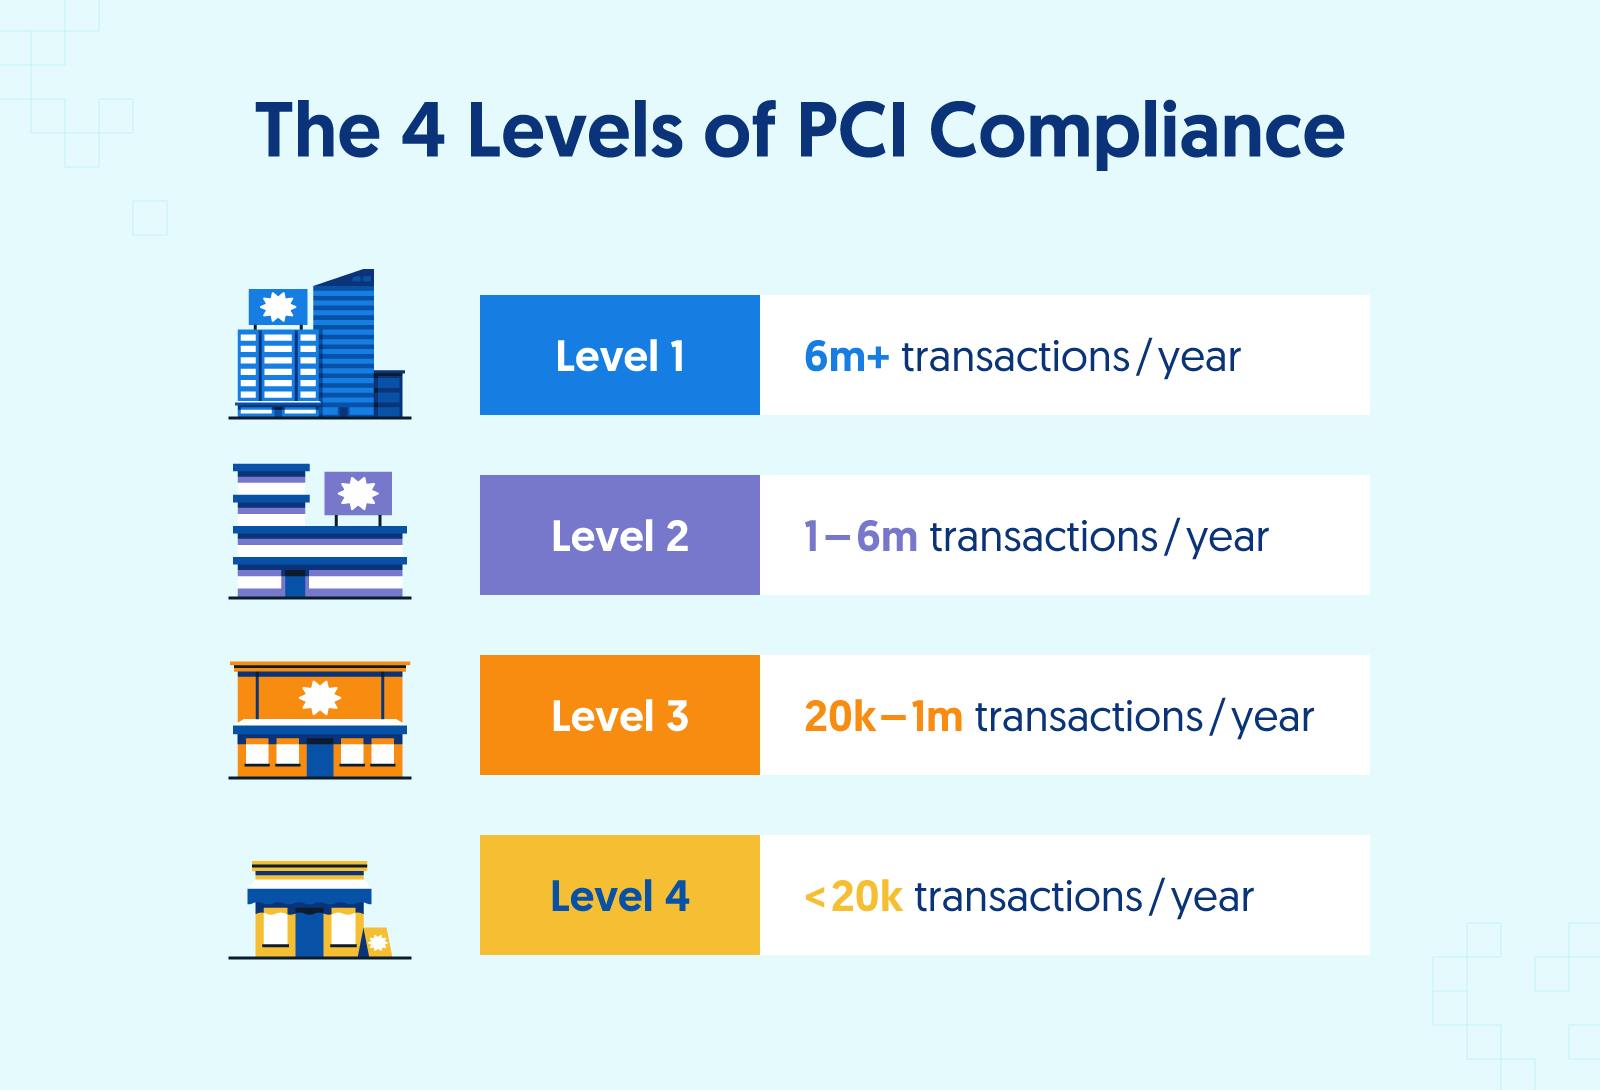 What is the difference between PCI compliance Level 1 and 2?